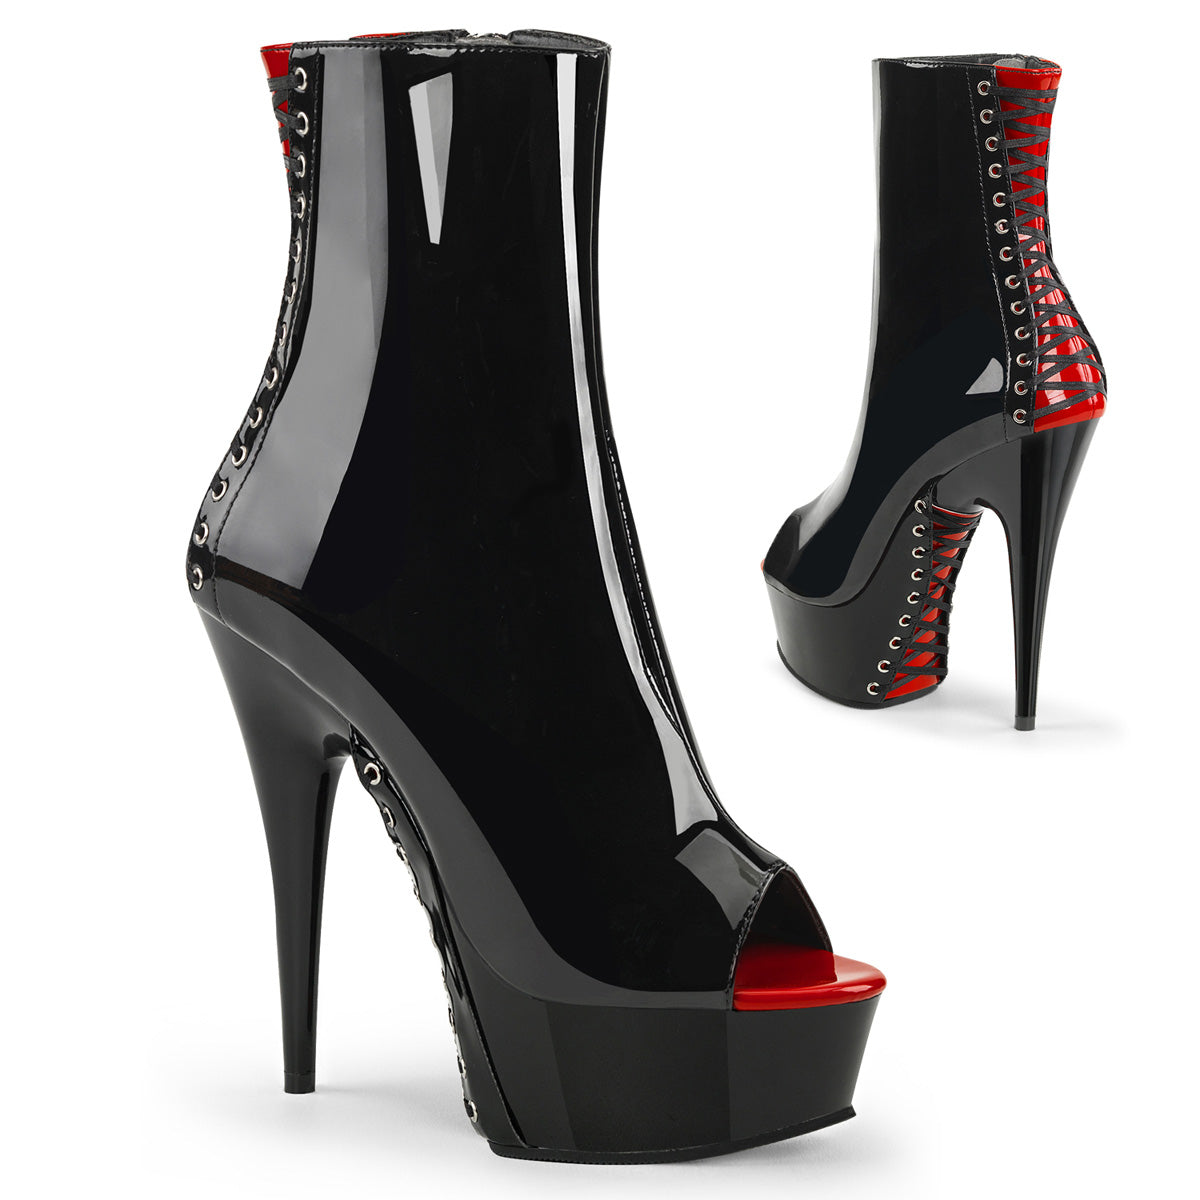 DELIGHT-1025 Black & Red Calf High Peep Toe Boots